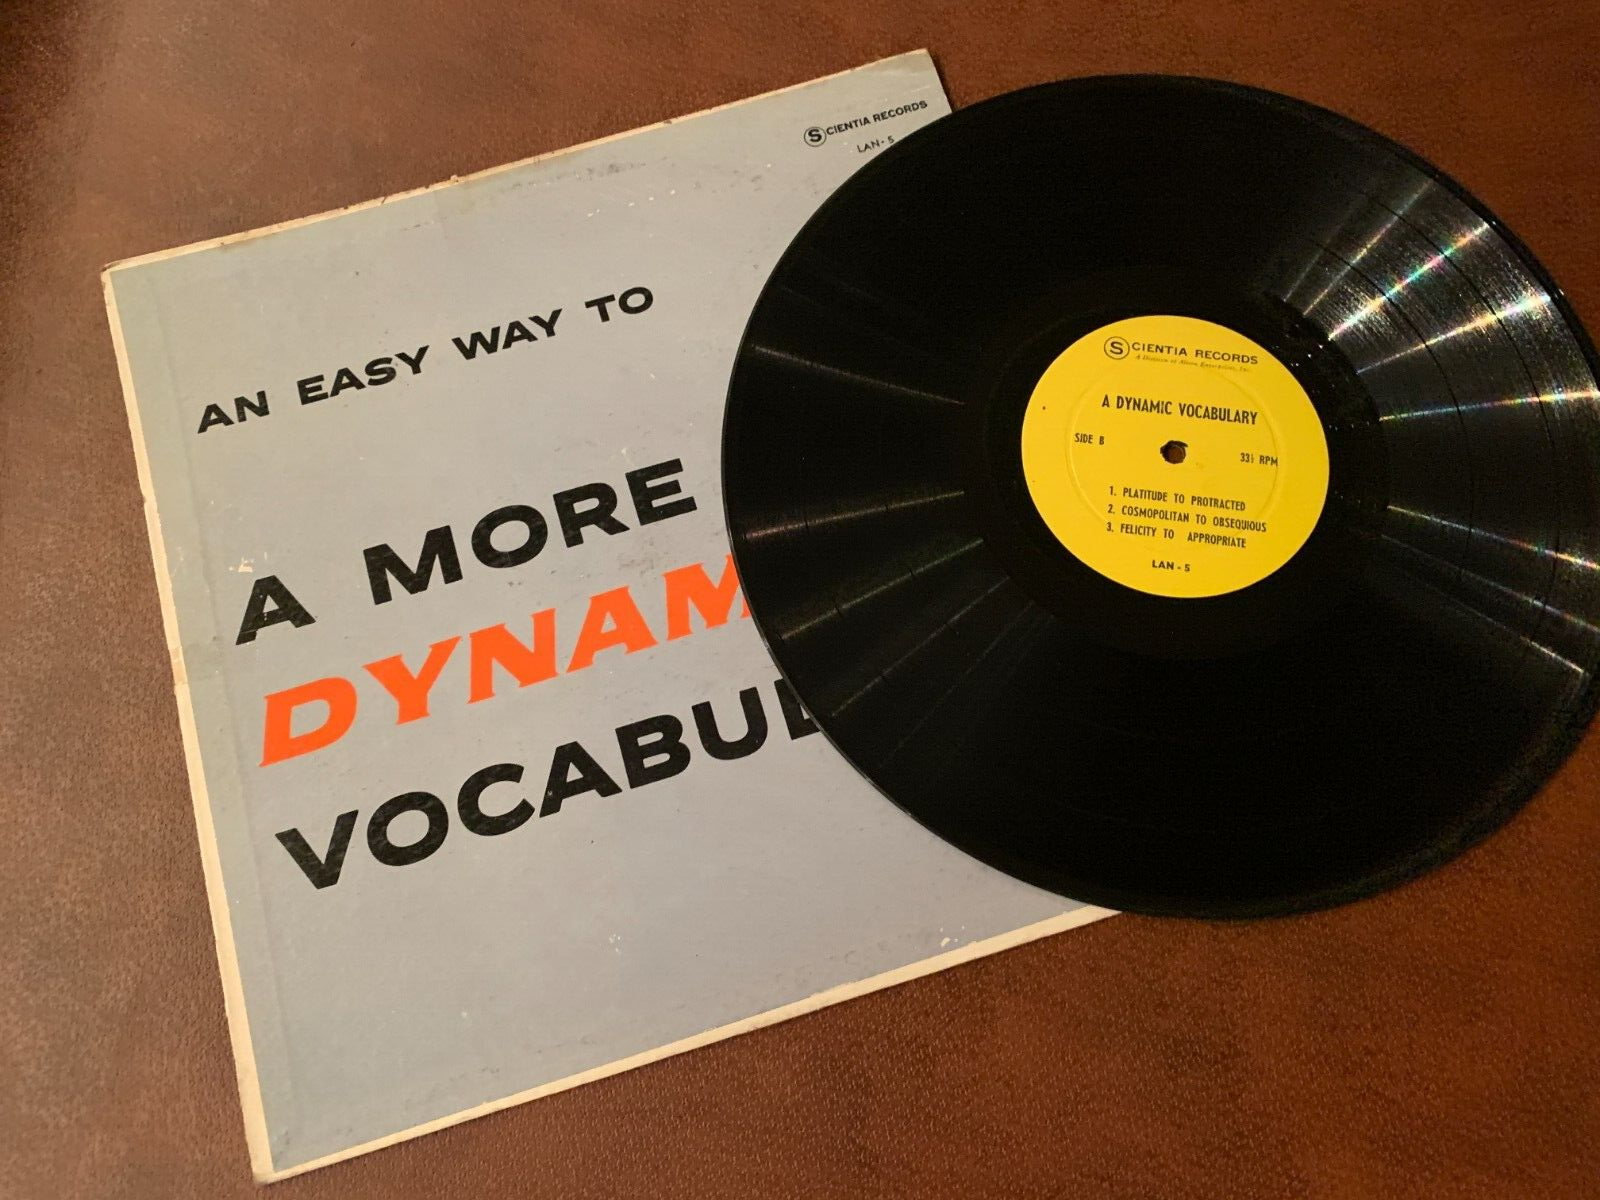 Pic 2 An Easy Way To A More Dynamic Vocabulary Jan Kindle1964 LAN-5 Vinyl 12'' Vintage